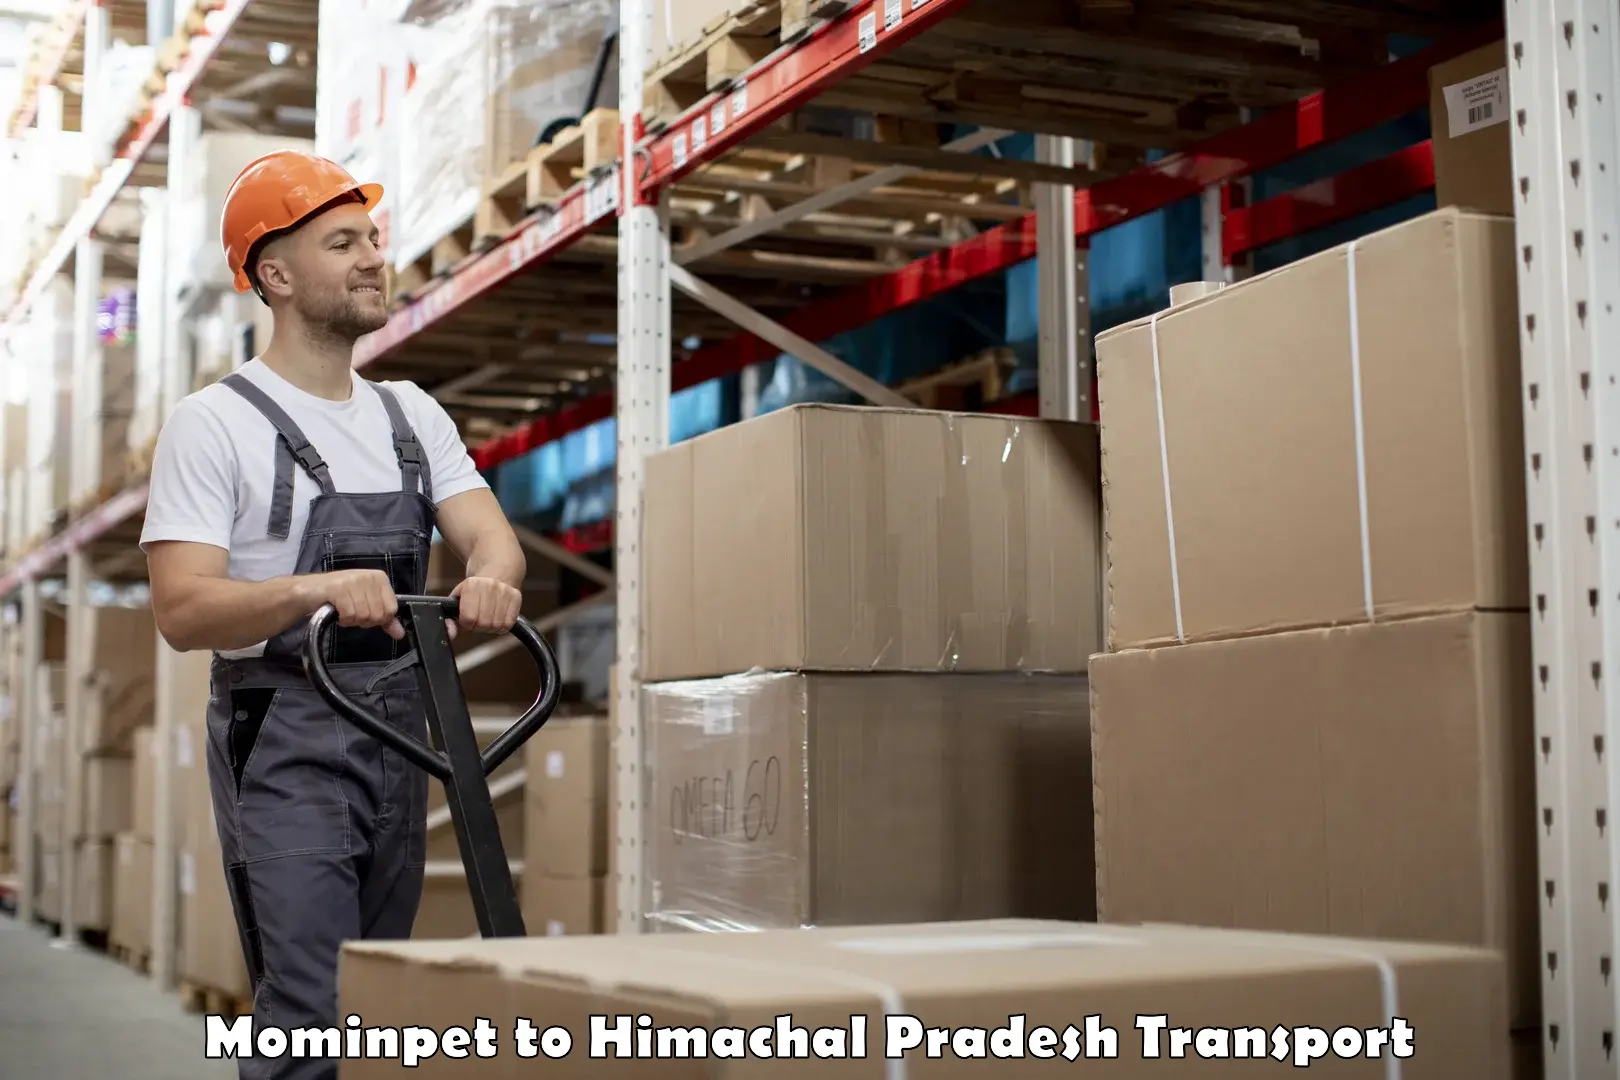 Luggage transport services in Mominpet to Bilaspur Himachal Pradesh